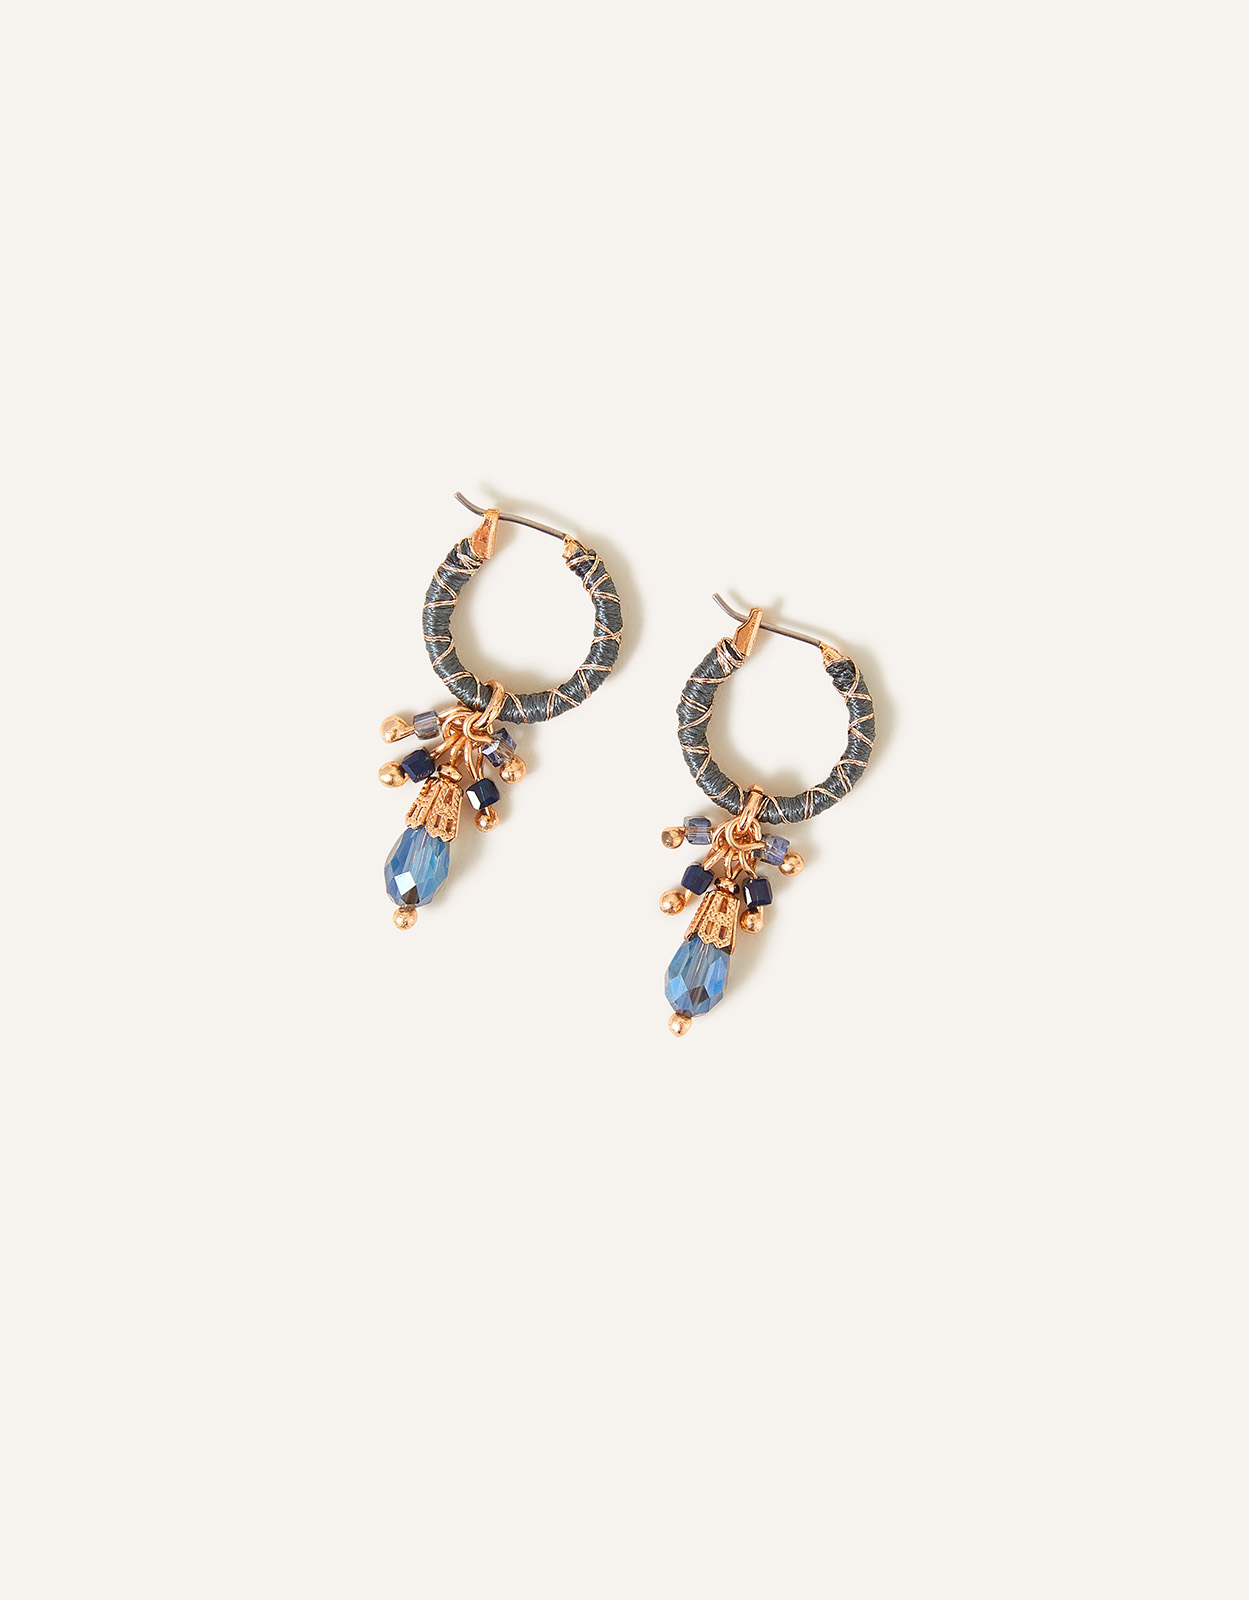 Accessorize Women's Gold and Blue Brass Beaded Wrapped Hoop Earrings, Size: One Size